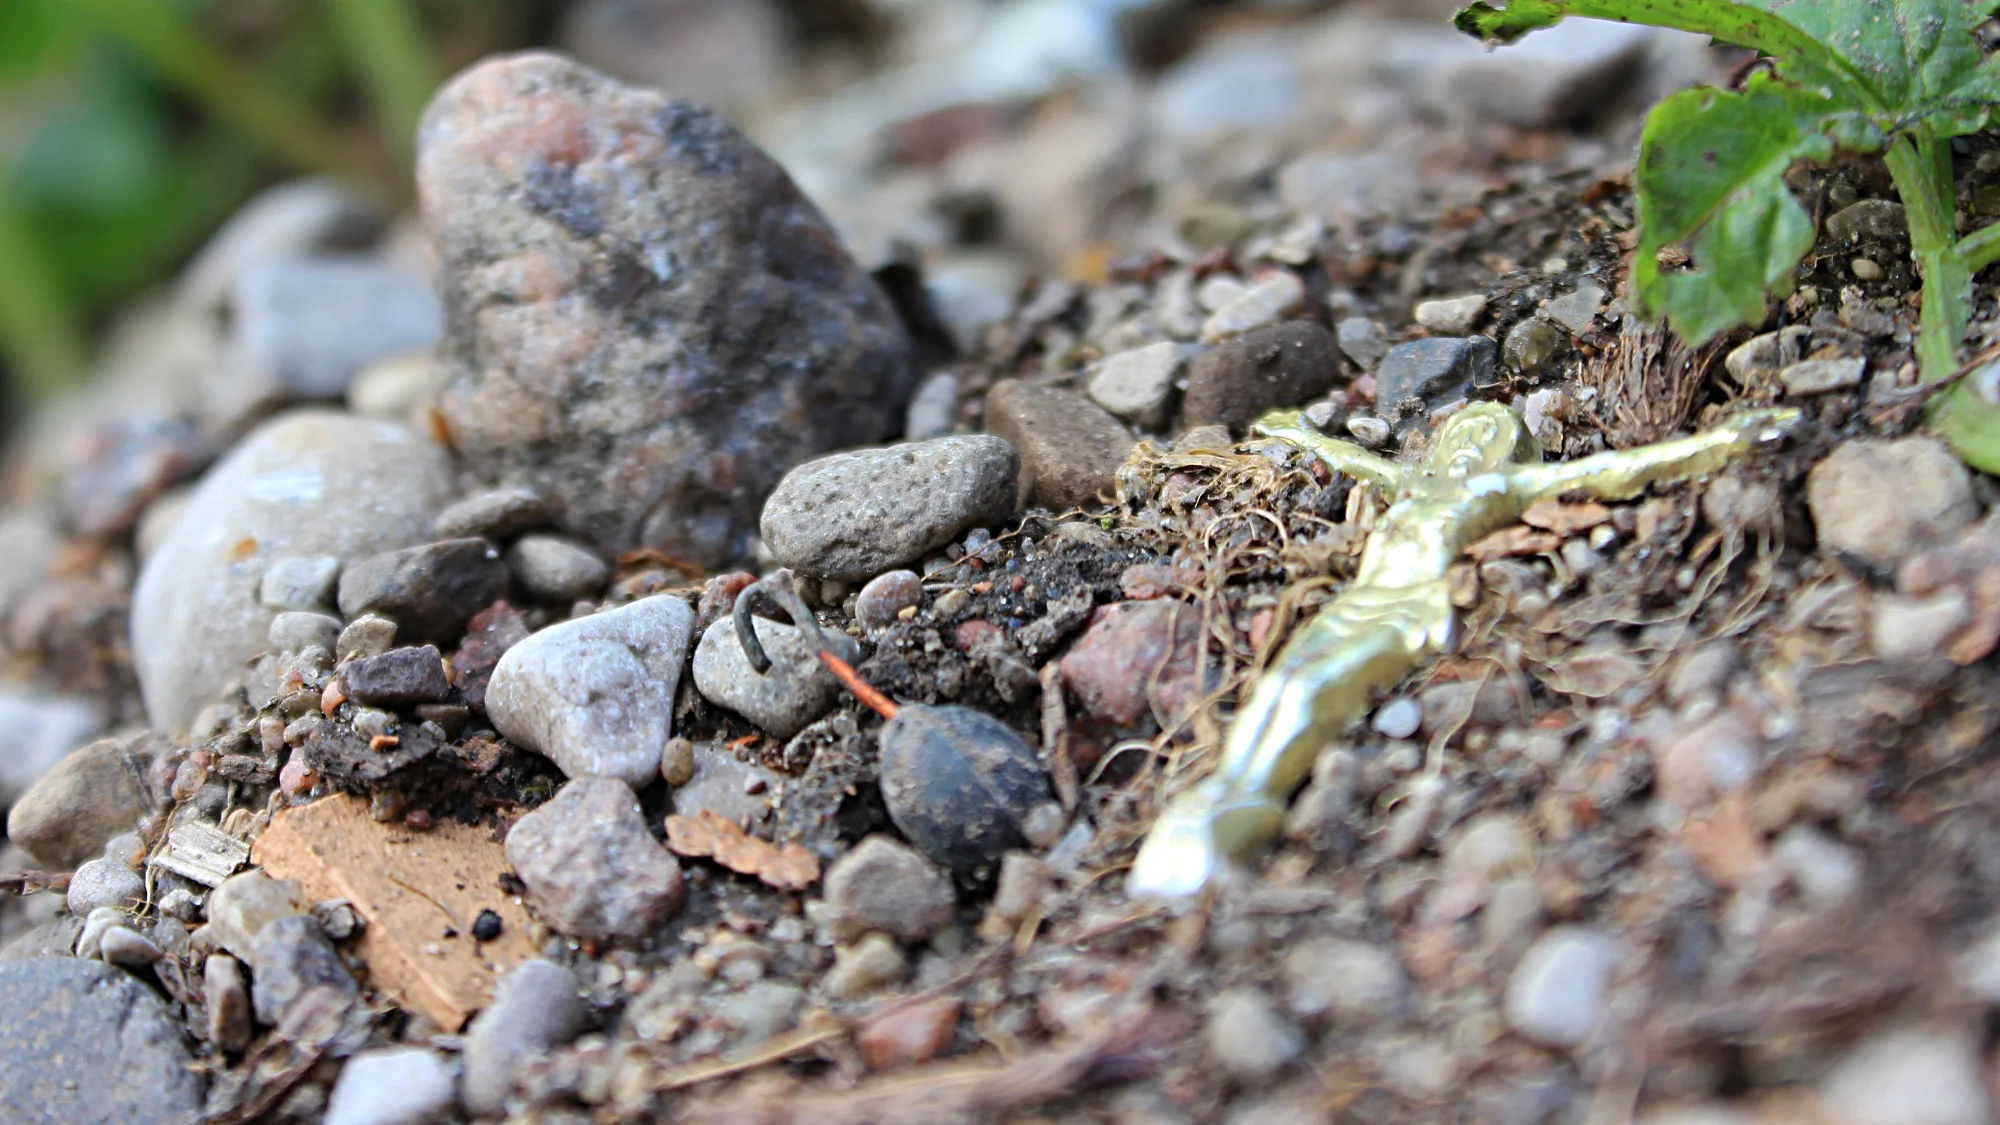 A miniature statue of Jesus lying on the ground beside small rocks.